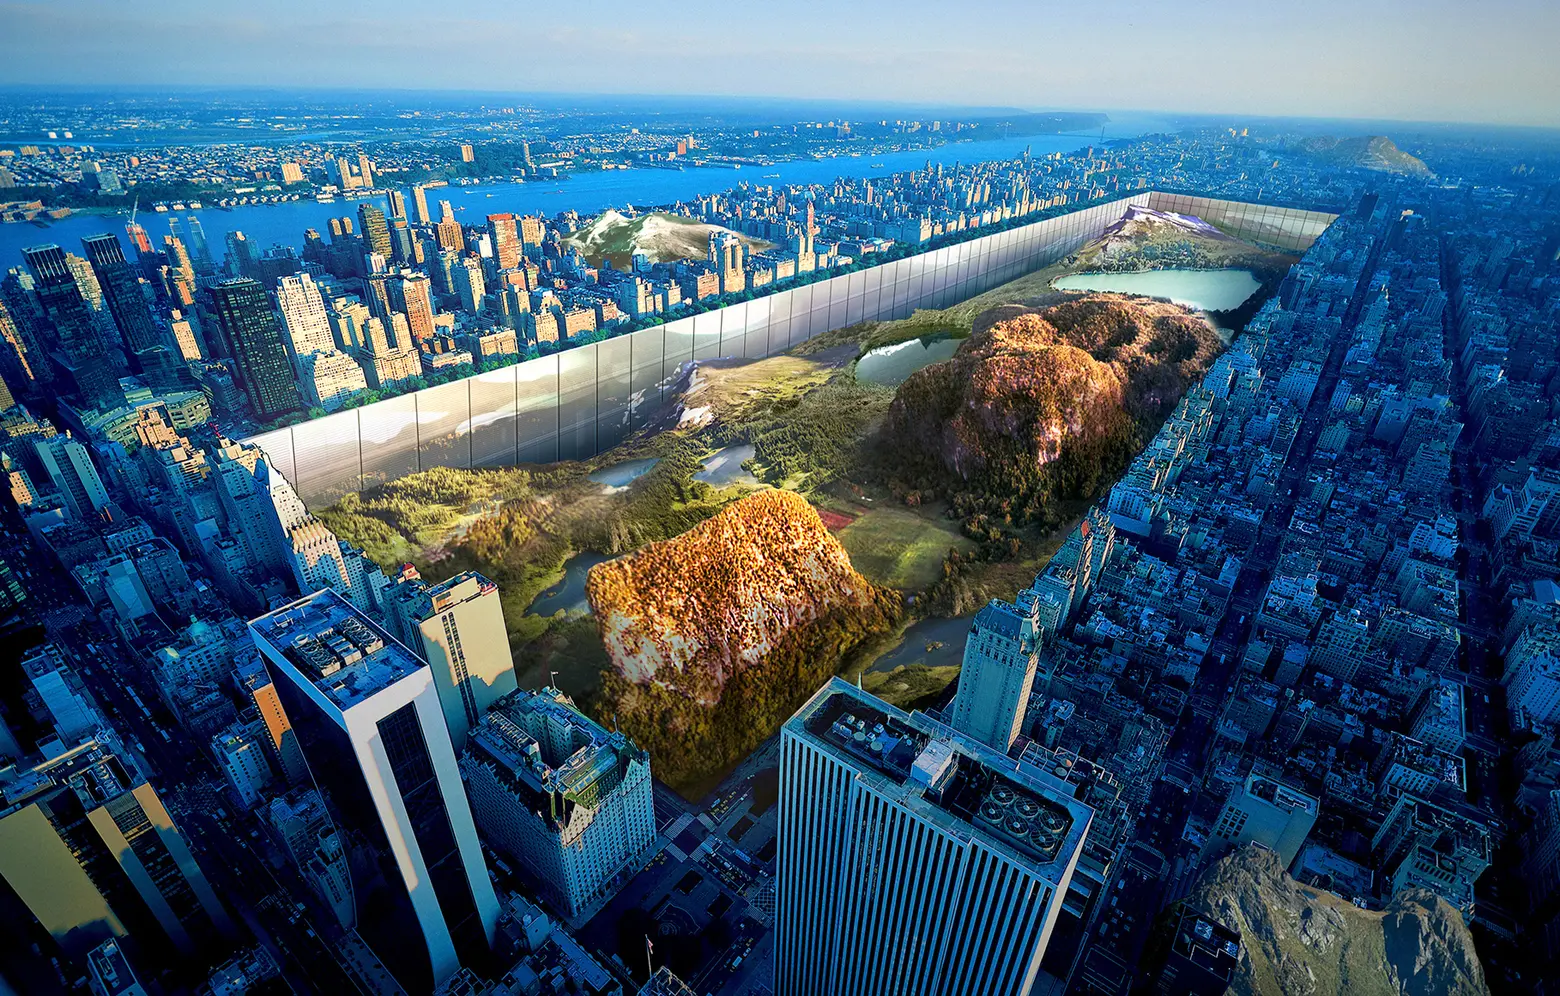 Skyscraper Proposal Digs Out Central Park and Surrounds It With 1,000-Foot Glass Structure